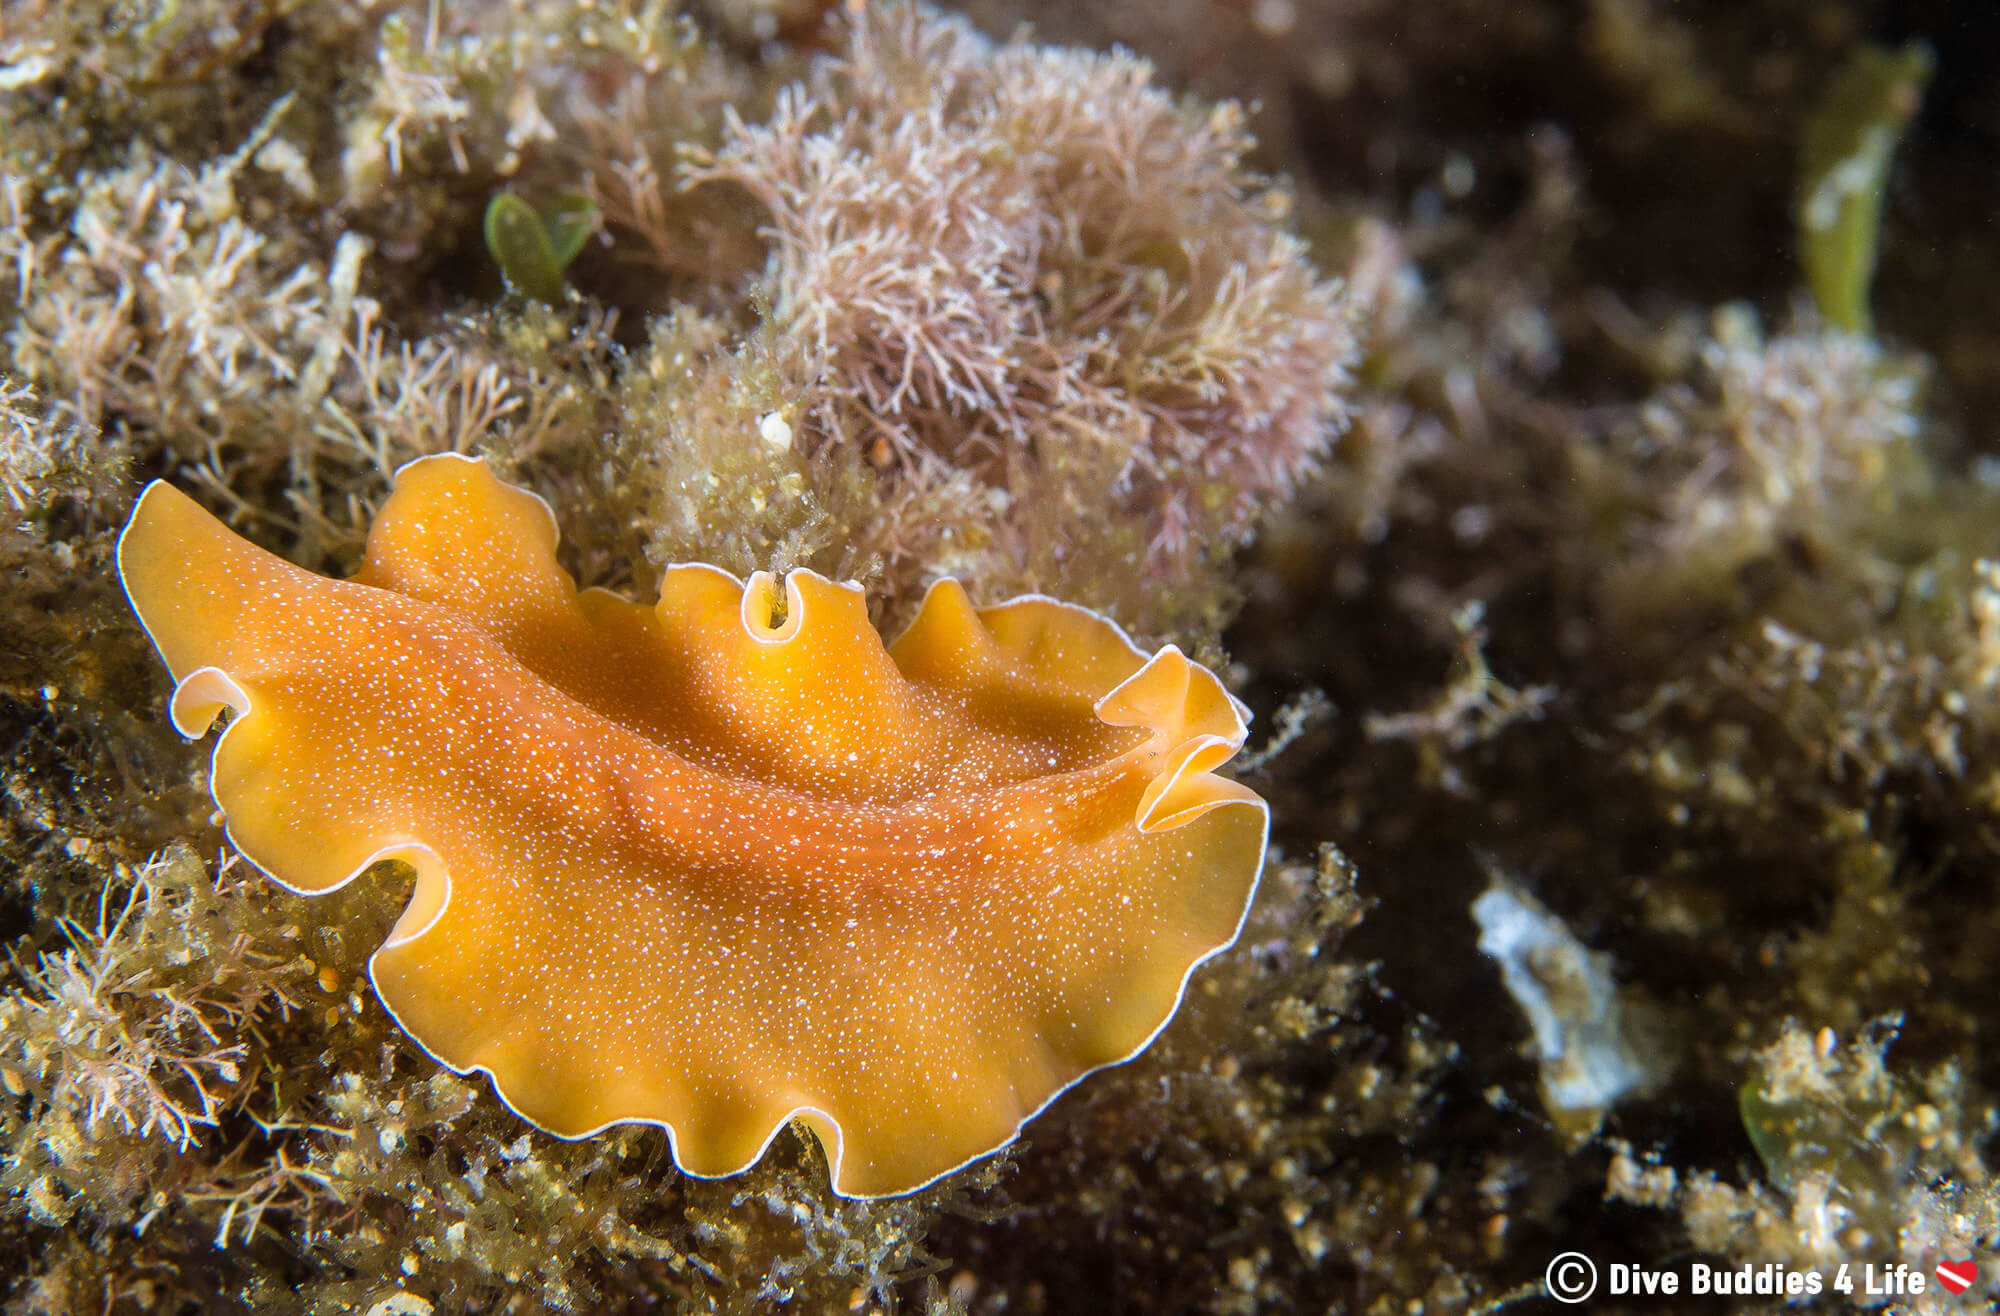 An Orange Flatworm In The Flora Of The Costa Brava In Spain, Europe